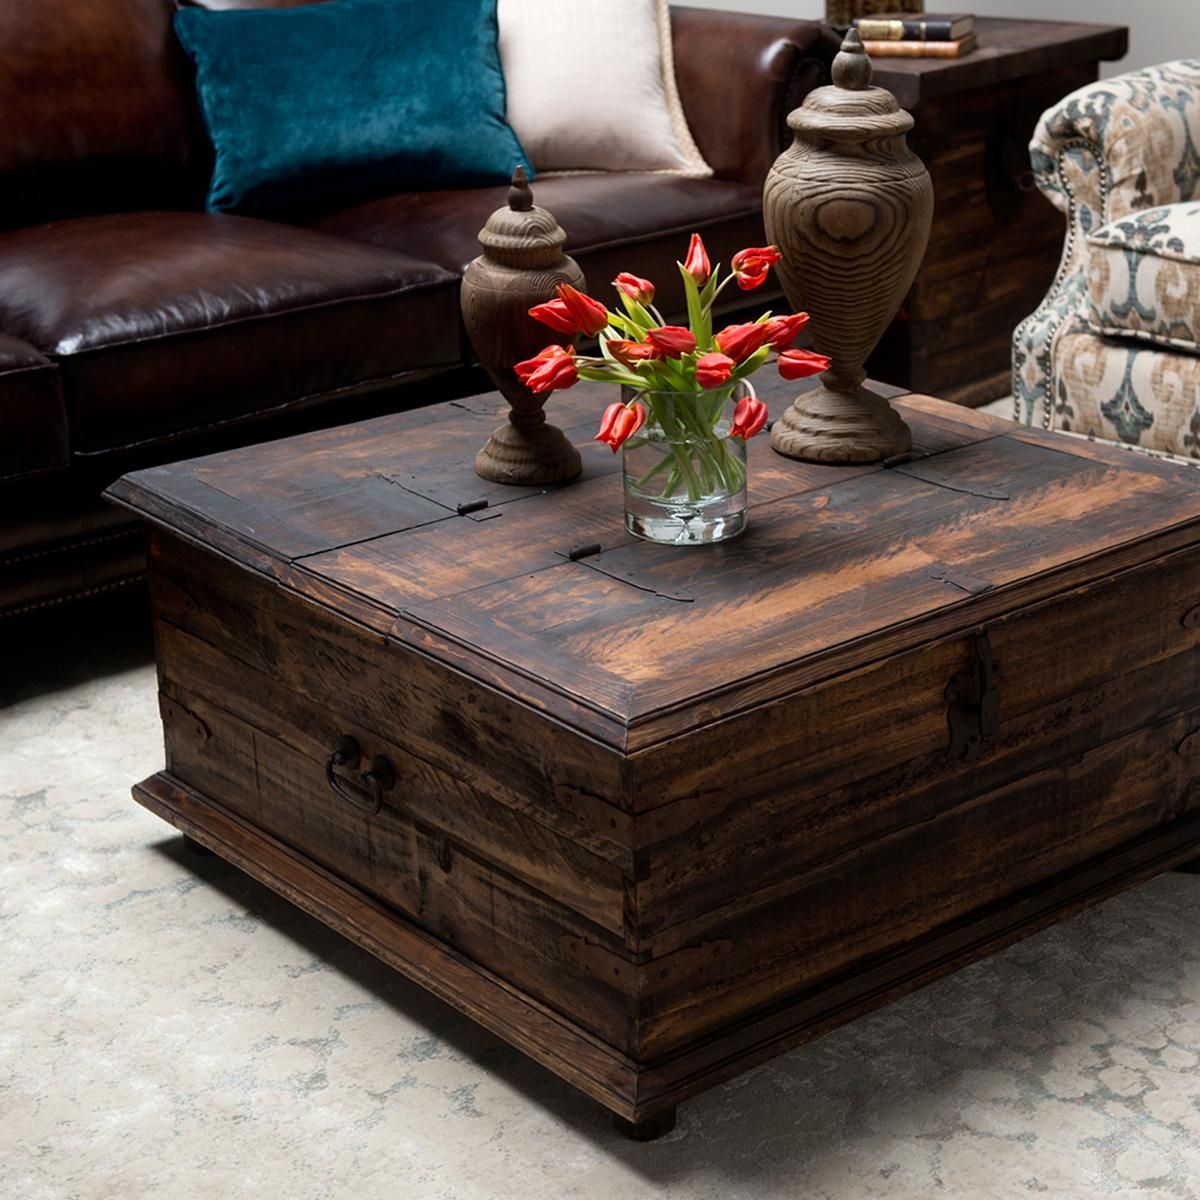 Rustic Trunk Coffee Table For Your Living Room – Homes Furniture Ideas Intended For Rustic Coffee Tables (View 7 of 15)